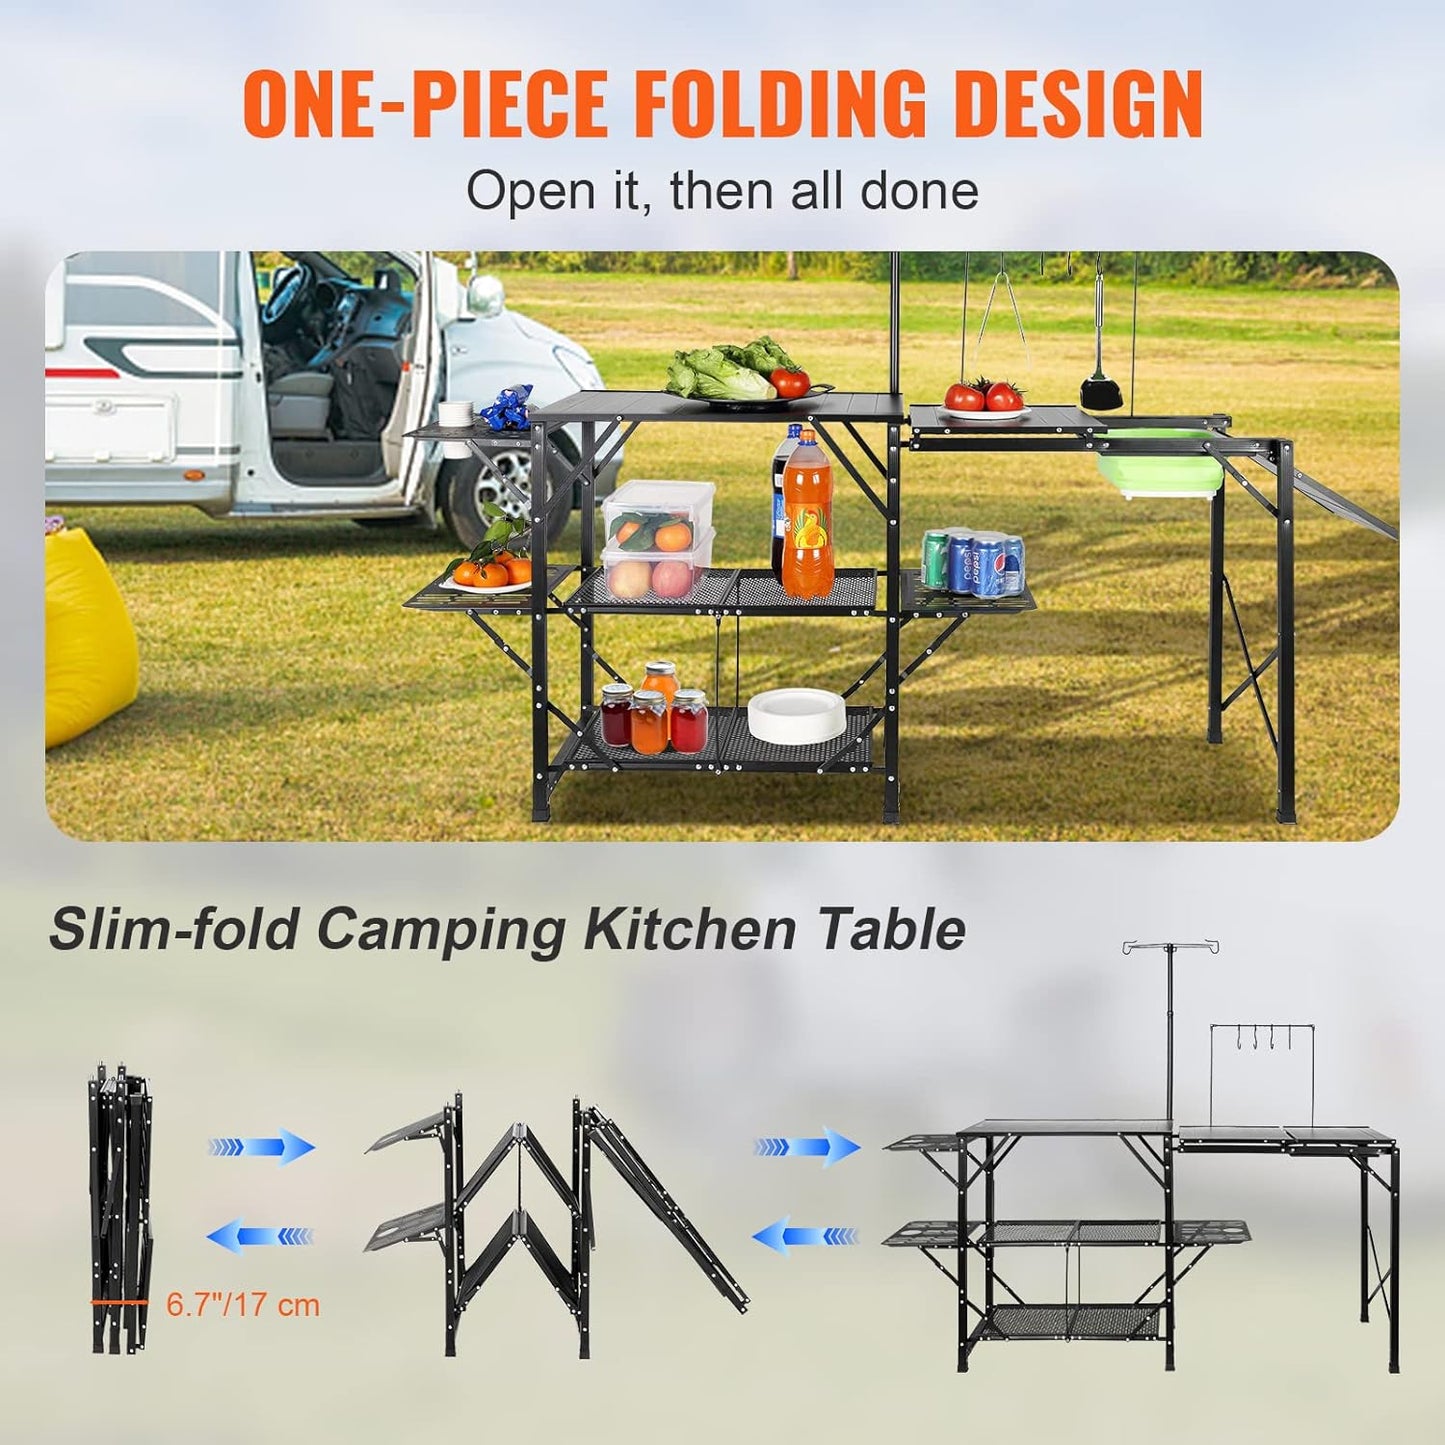 VEVOR Camping Kitchen Table with Sink, Aluminum Folding Portable Outdoor Cook Station, 2 Shelves & Carrying Bag for Picnic BBQ Beach Traveling